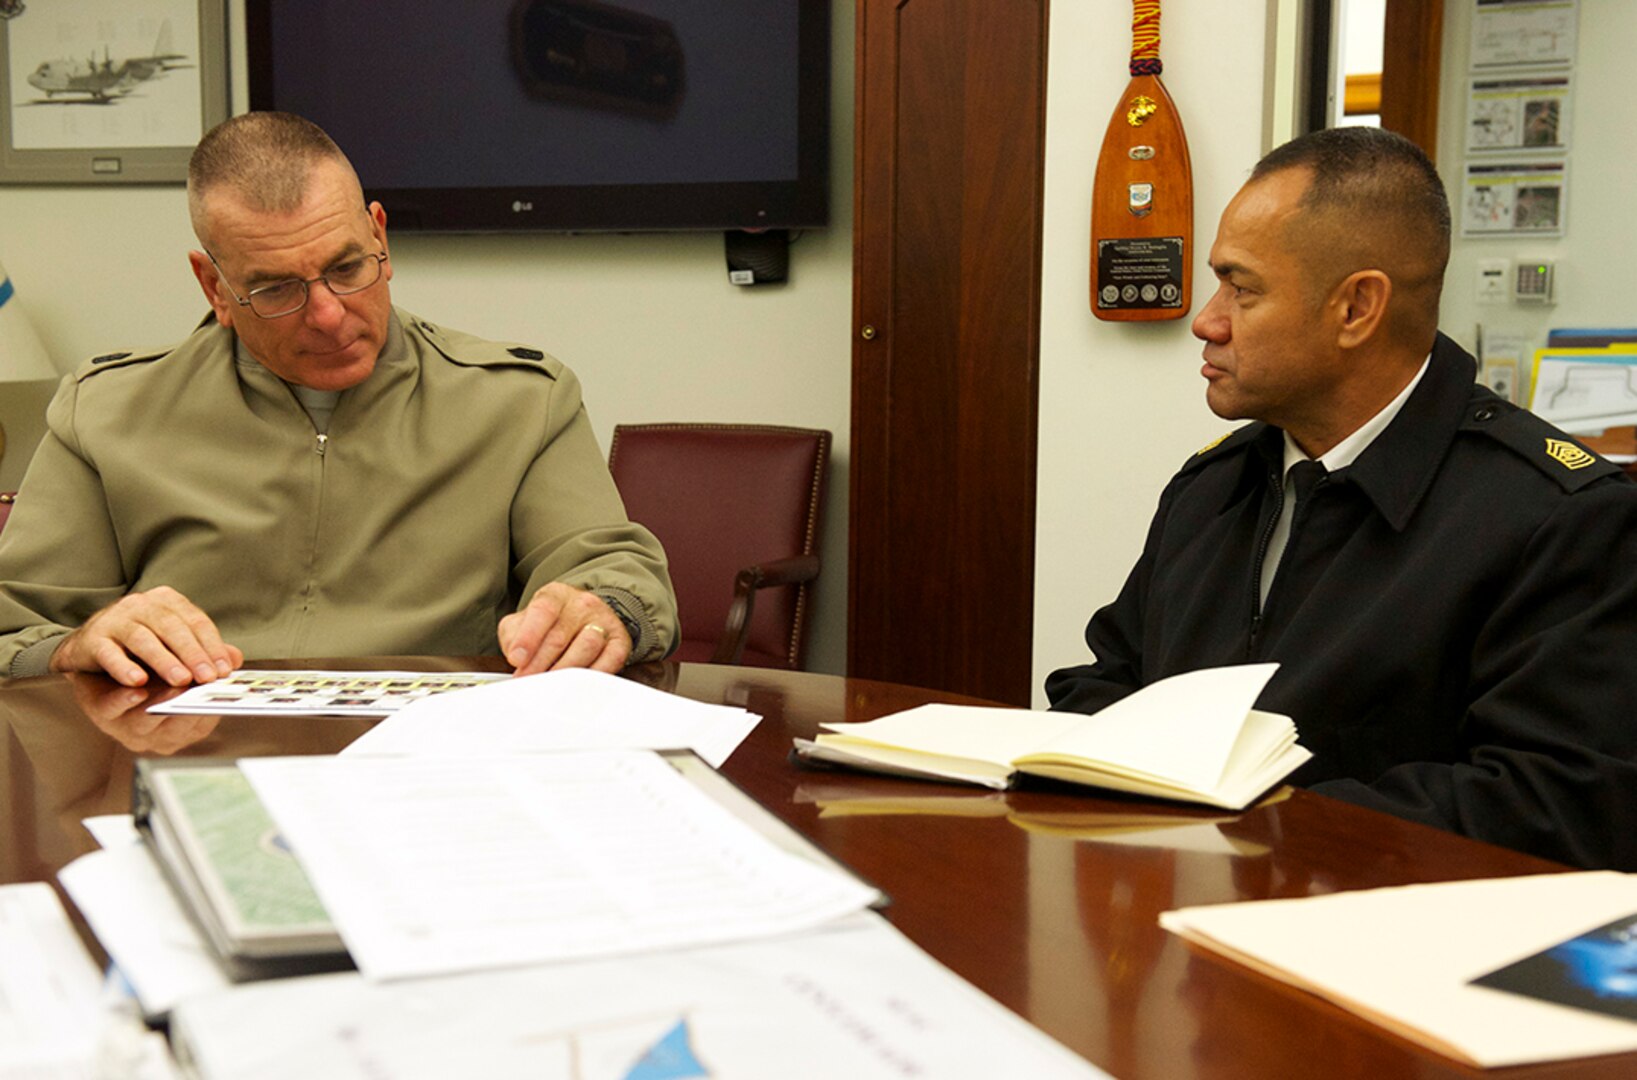 (From left) Marine Corps Sgt. Maj. Bryan Battaglia talks with Army Command Sgt. Major Charles Tobin, the Defense Logistics Agency’s senior enlisted leader, during an Oct. 20 visit to the Pentagon. Photo by Army Master Sgt. Terrence Hayes